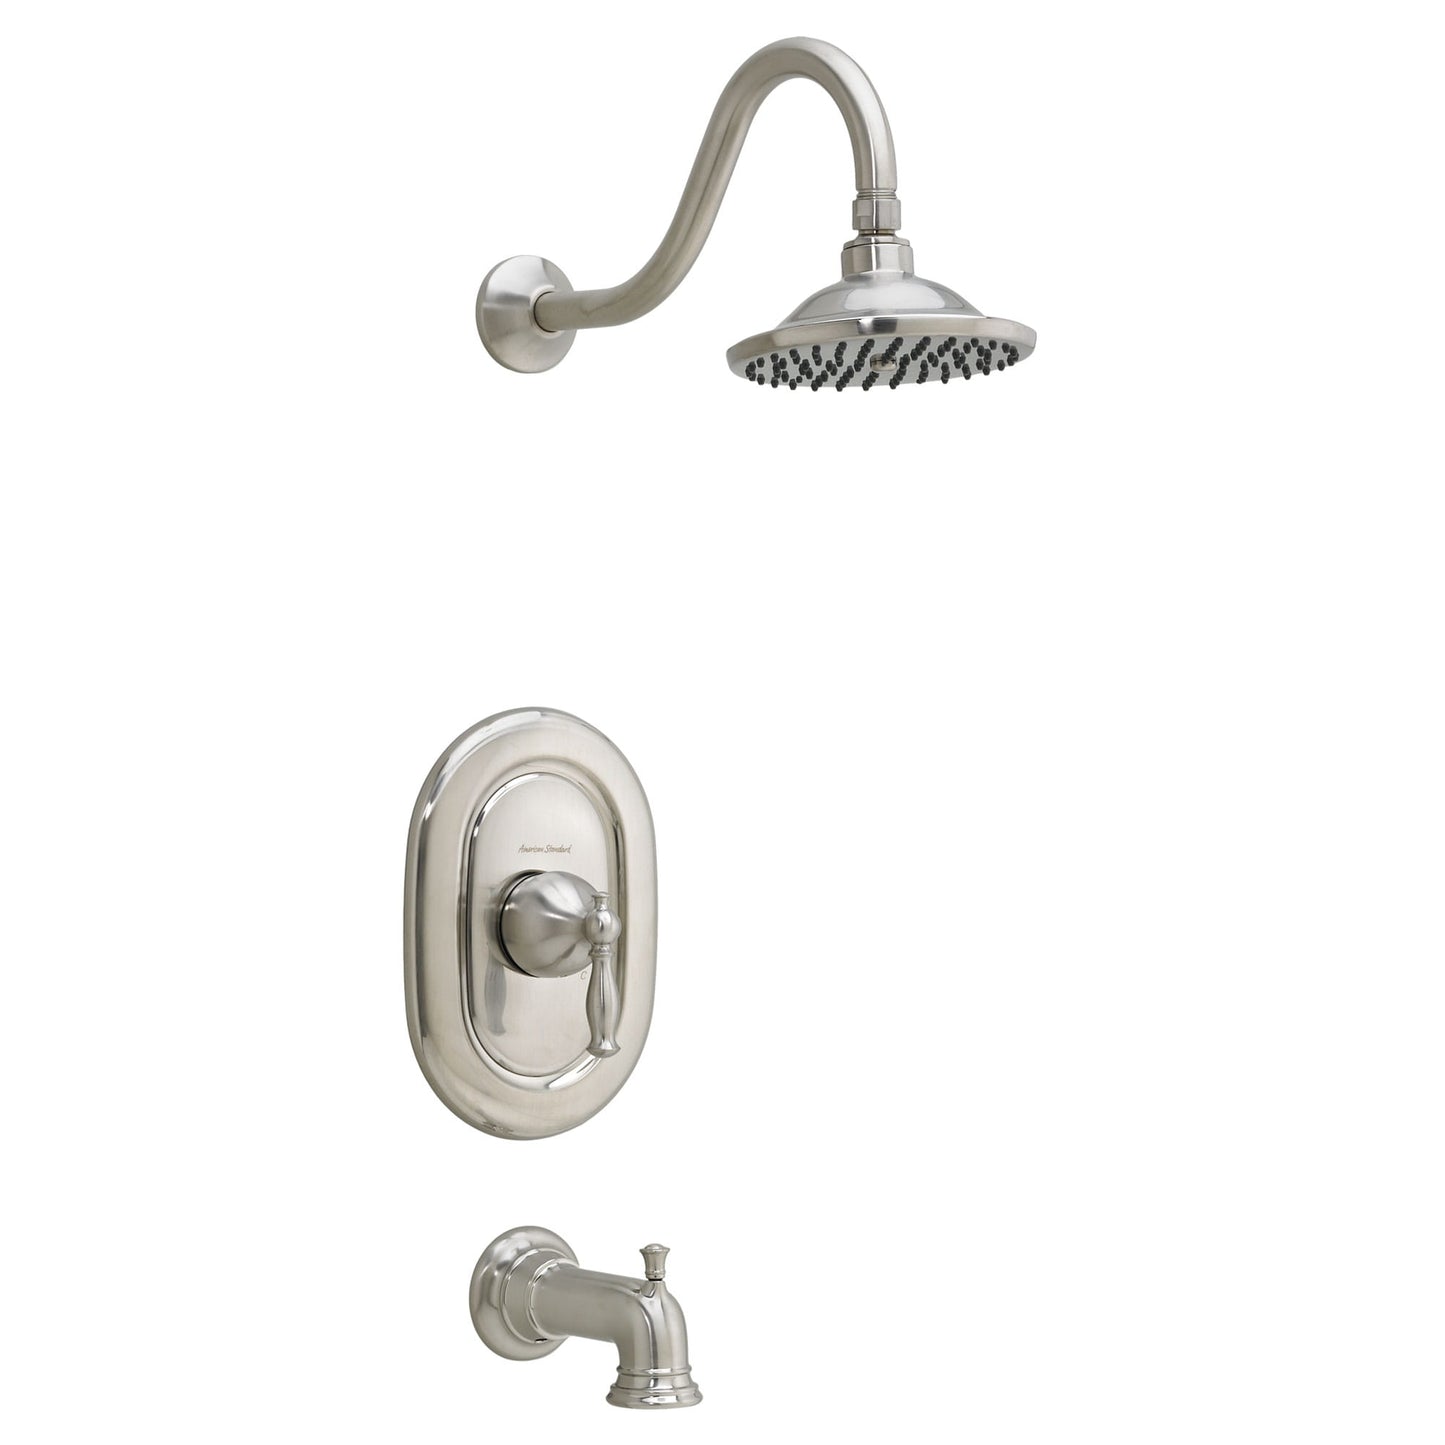 "QUENTIN" BRUSHED NICKEL PRESSURE BALANCED BATH AND SHOWER TRIM WITH FLOWISE WATER SAVING 3 FUNCTION SHOWER HEAD, LESS VALVE BODY